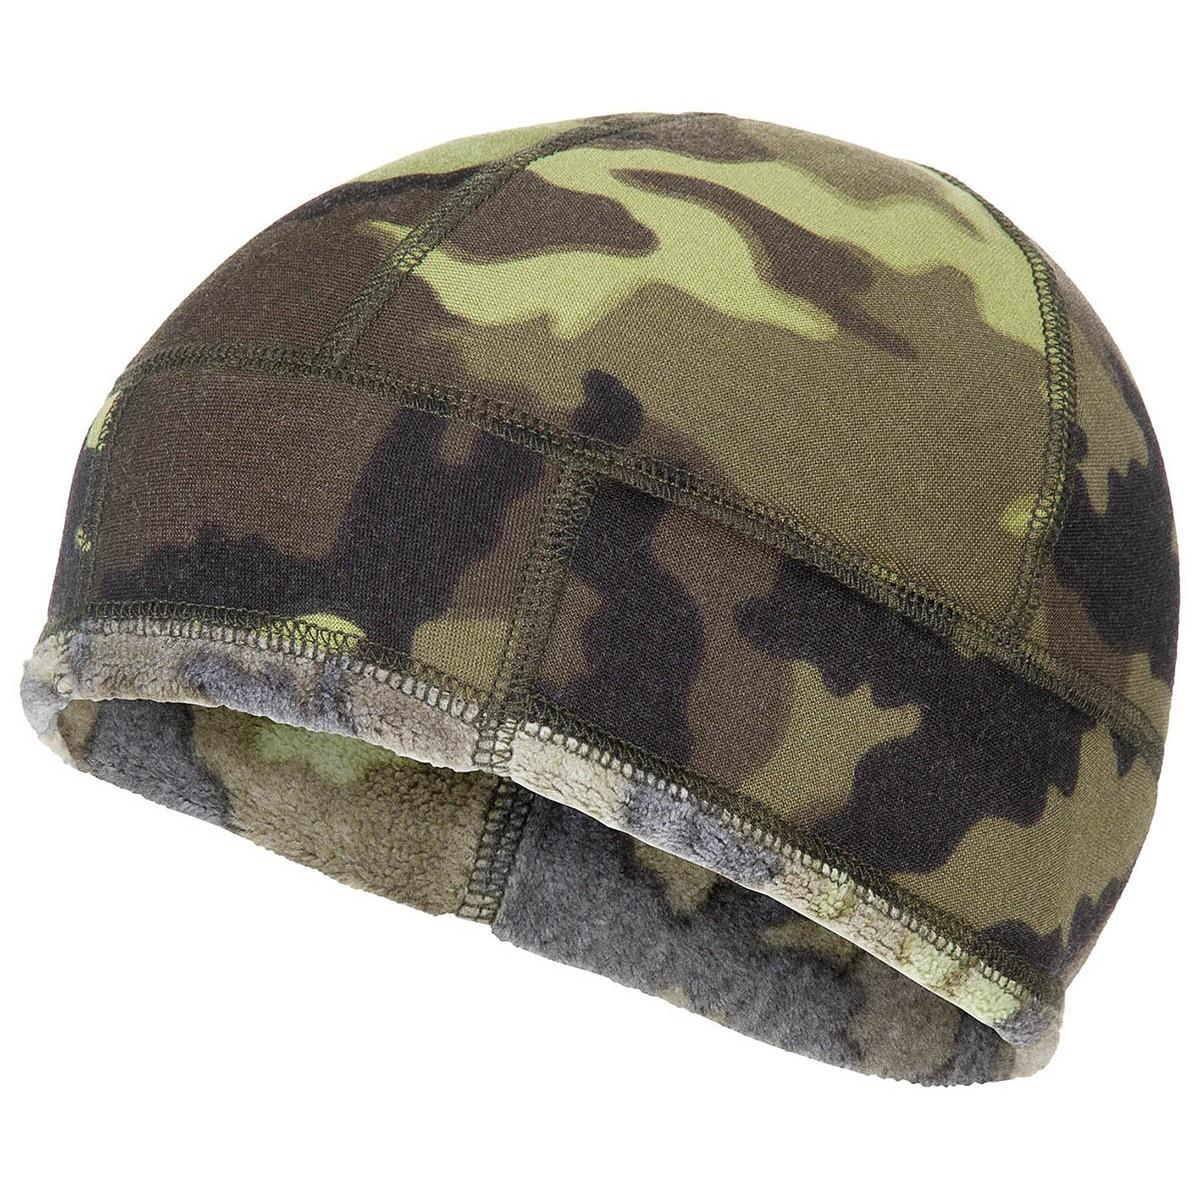 Type 95 Camouflage Czech Army Style Winter Cap - Surplus & Lost